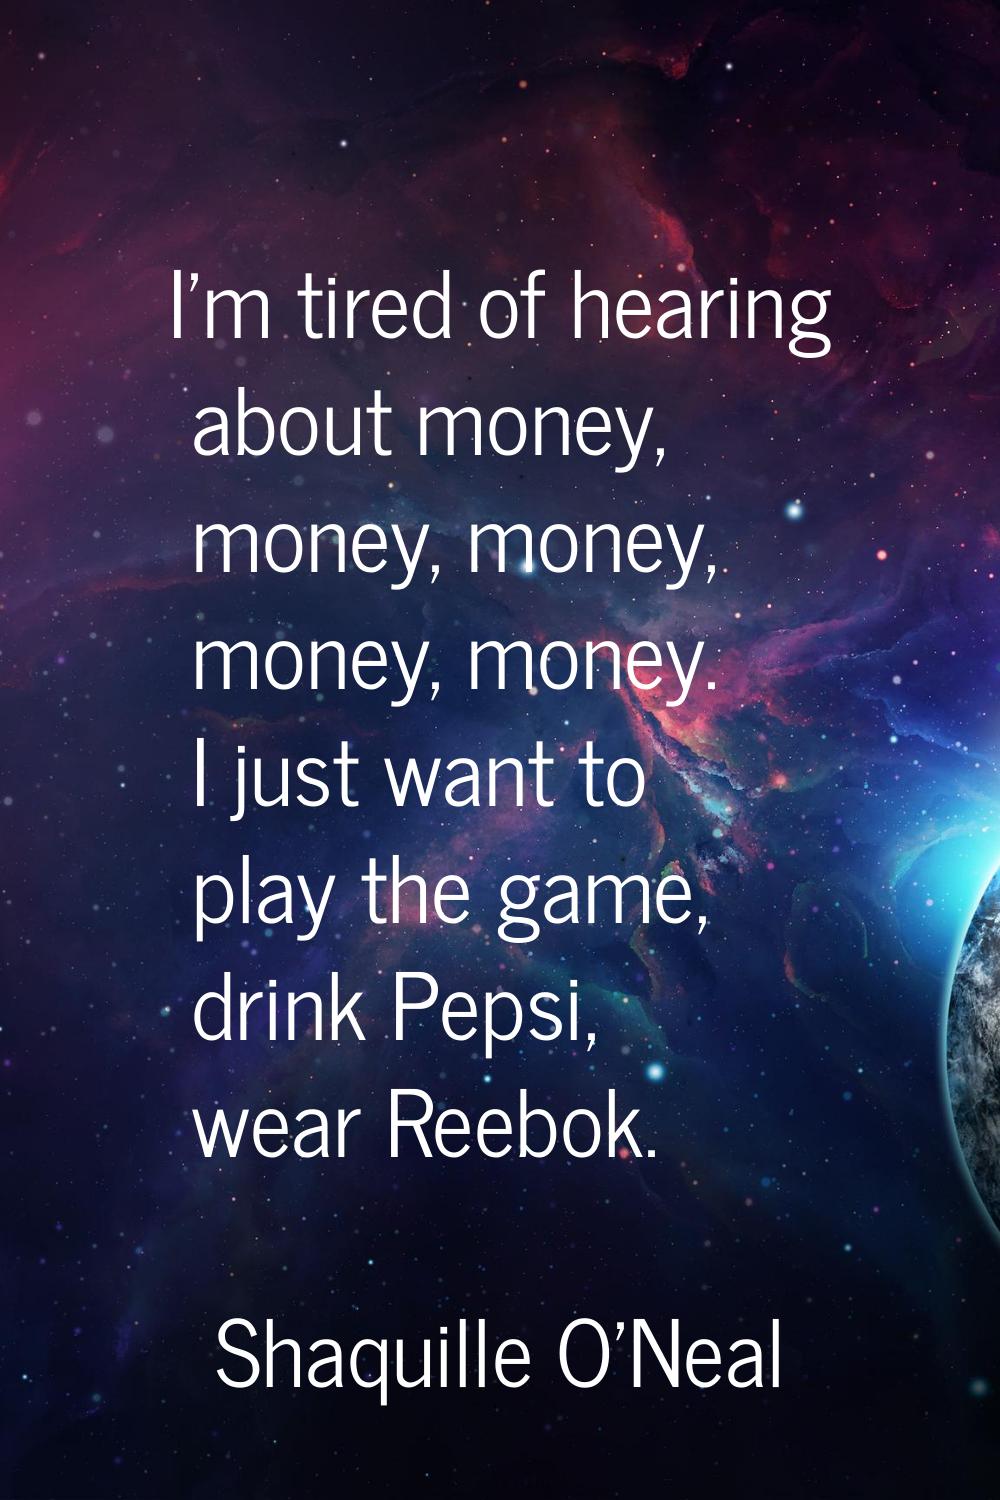 I'm tired of hearing about money, money, money, money, money. I just want to play the game, drink P